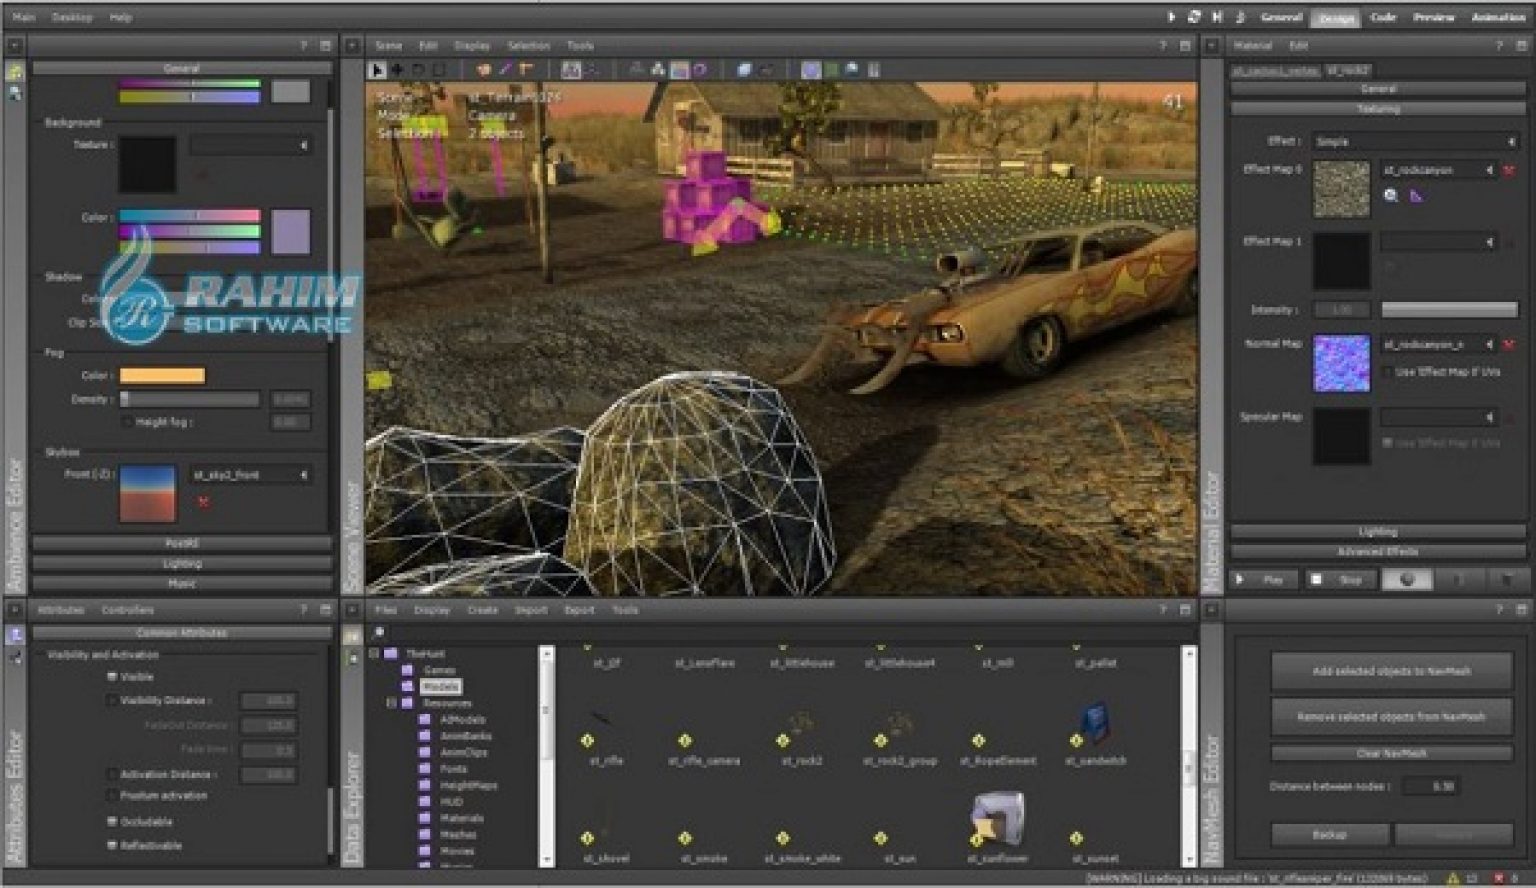 unity player download